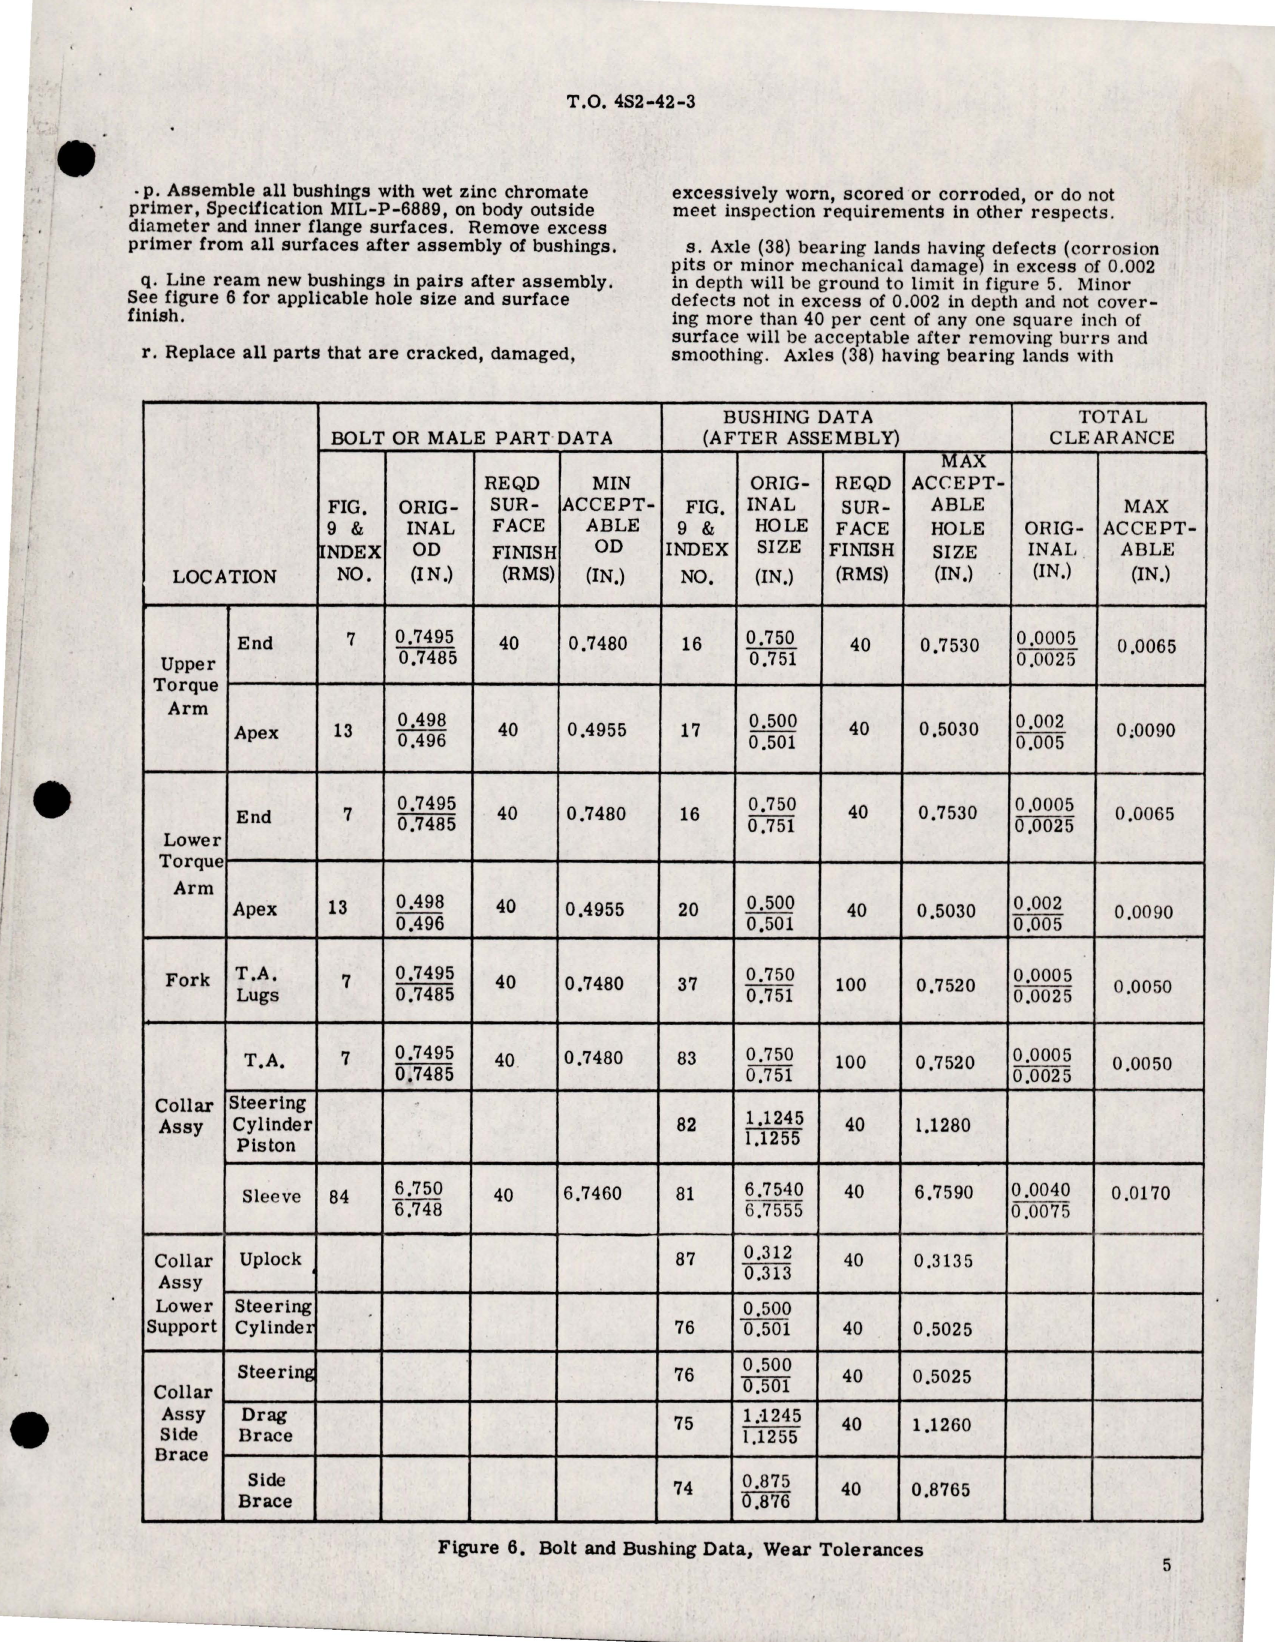 Sample page 5 from AirCorps Library document: Overhaul Instructions with Parts Breakdown for Nose Landing Gear Strut Assembly - Parts 8488B, 8488C, 8488D, 8488E, 8488G